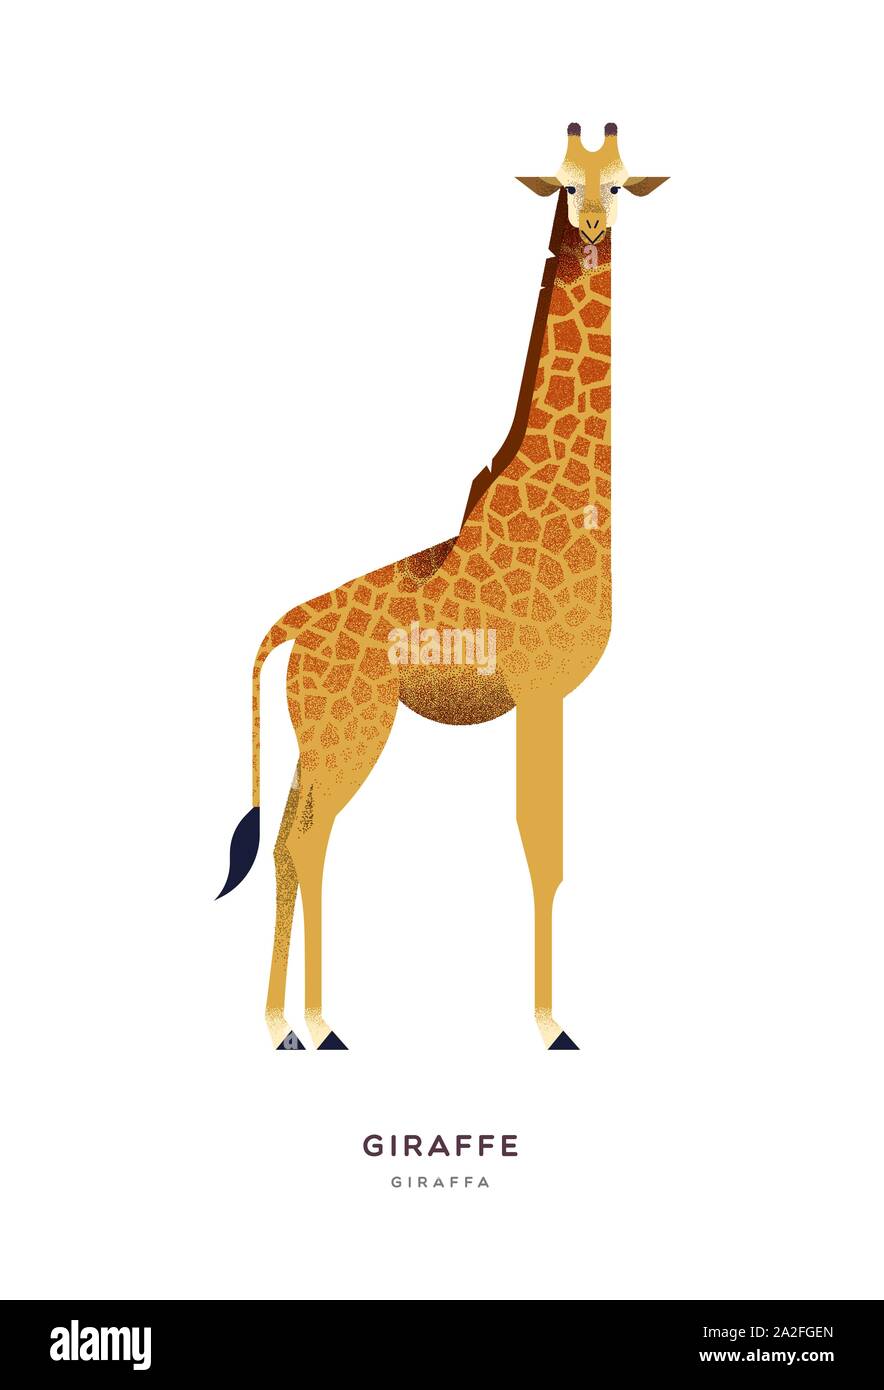 African giraffe illustration on isolated white background, zoo or safari animal concept. Educational wildlife design with fauna species name label. Stock Vector